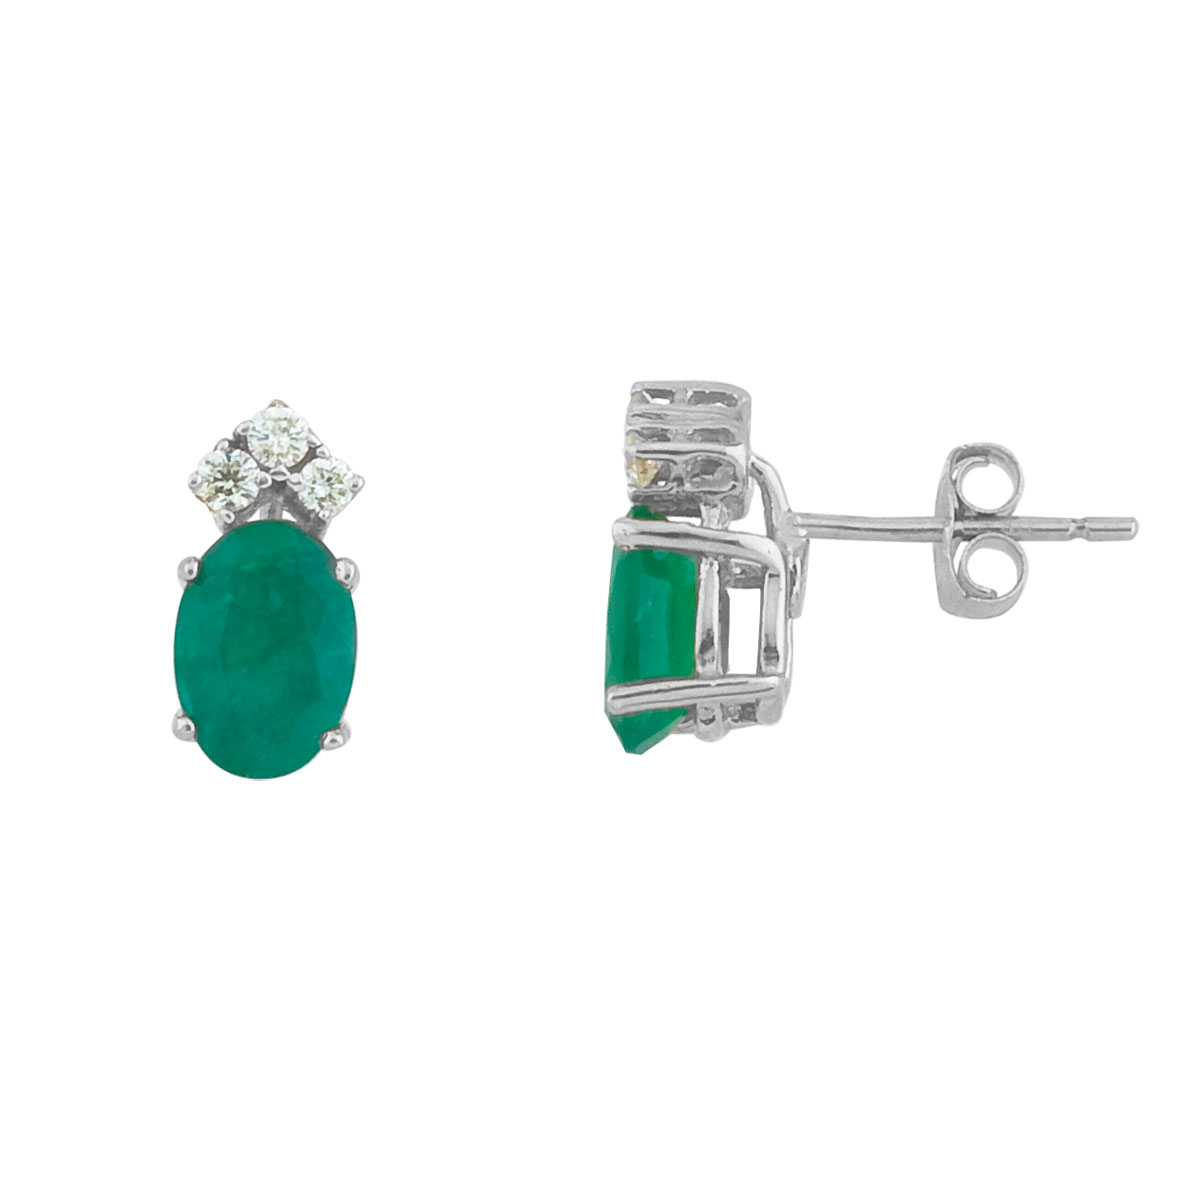 These 7x5 mm oval shaped emerald earrings are set in beautiful 14k white  gold and feature .12 to...